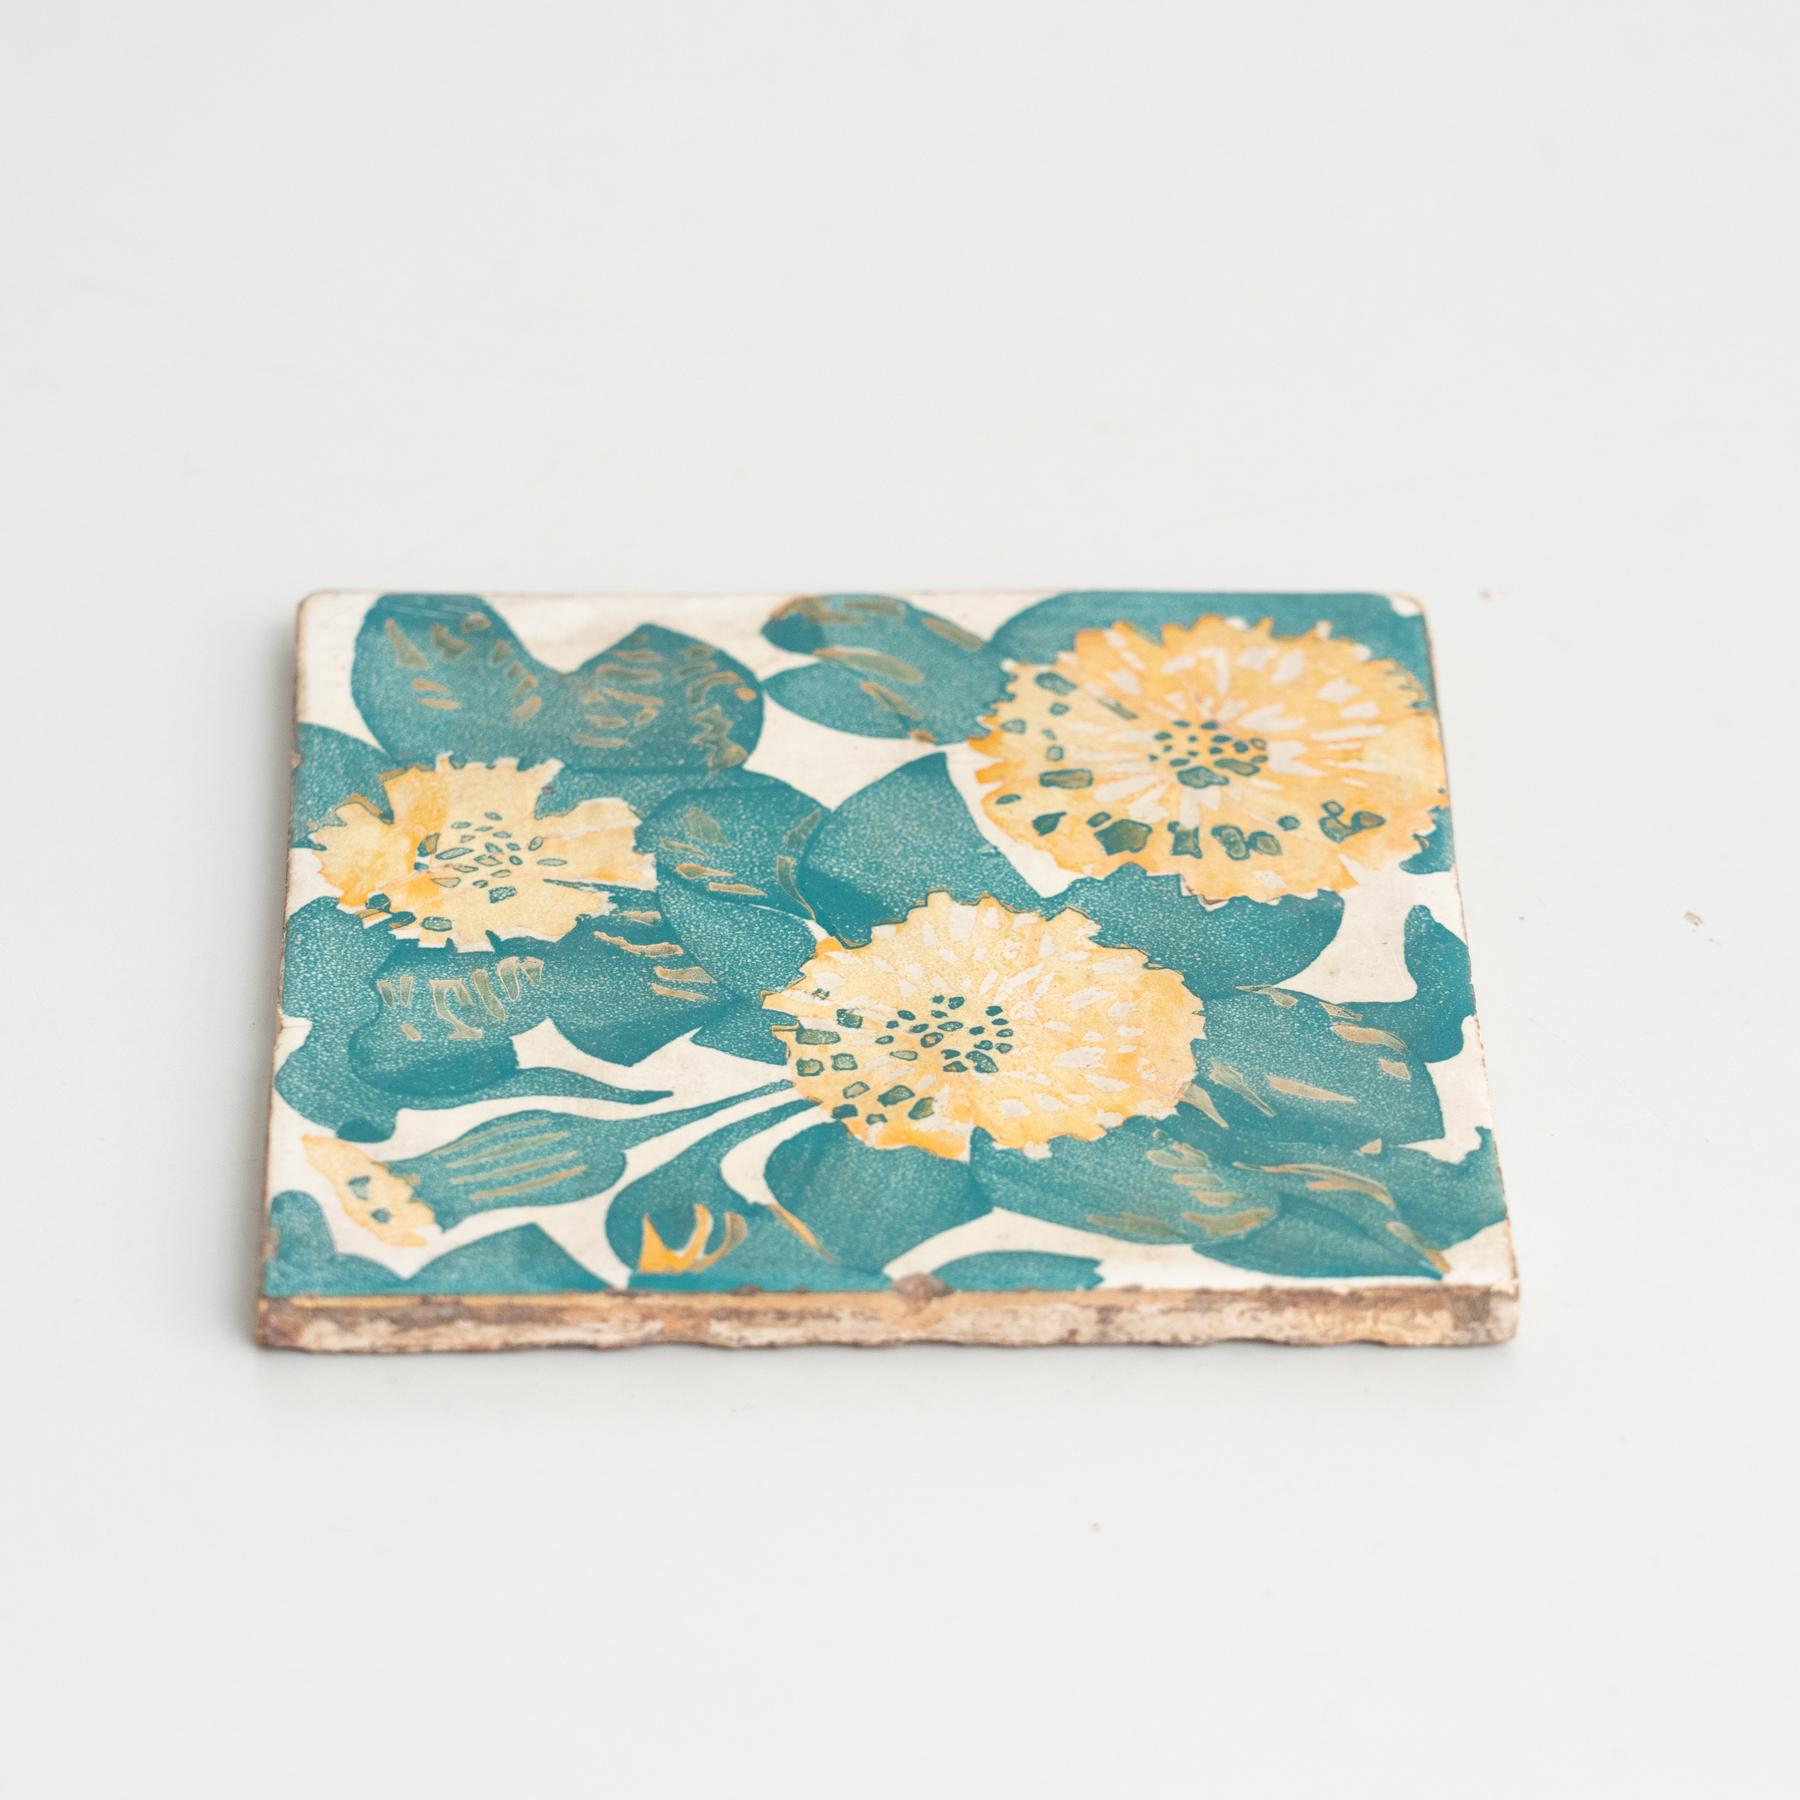 Decorative ceramic tile by Antoni Gaudi, inspired by the marigold and dianthus motifs on the decorative ceramic tiles he designed for the facade of Casa Vicens, which constitute some of its most iconic features.

In good original condition, with